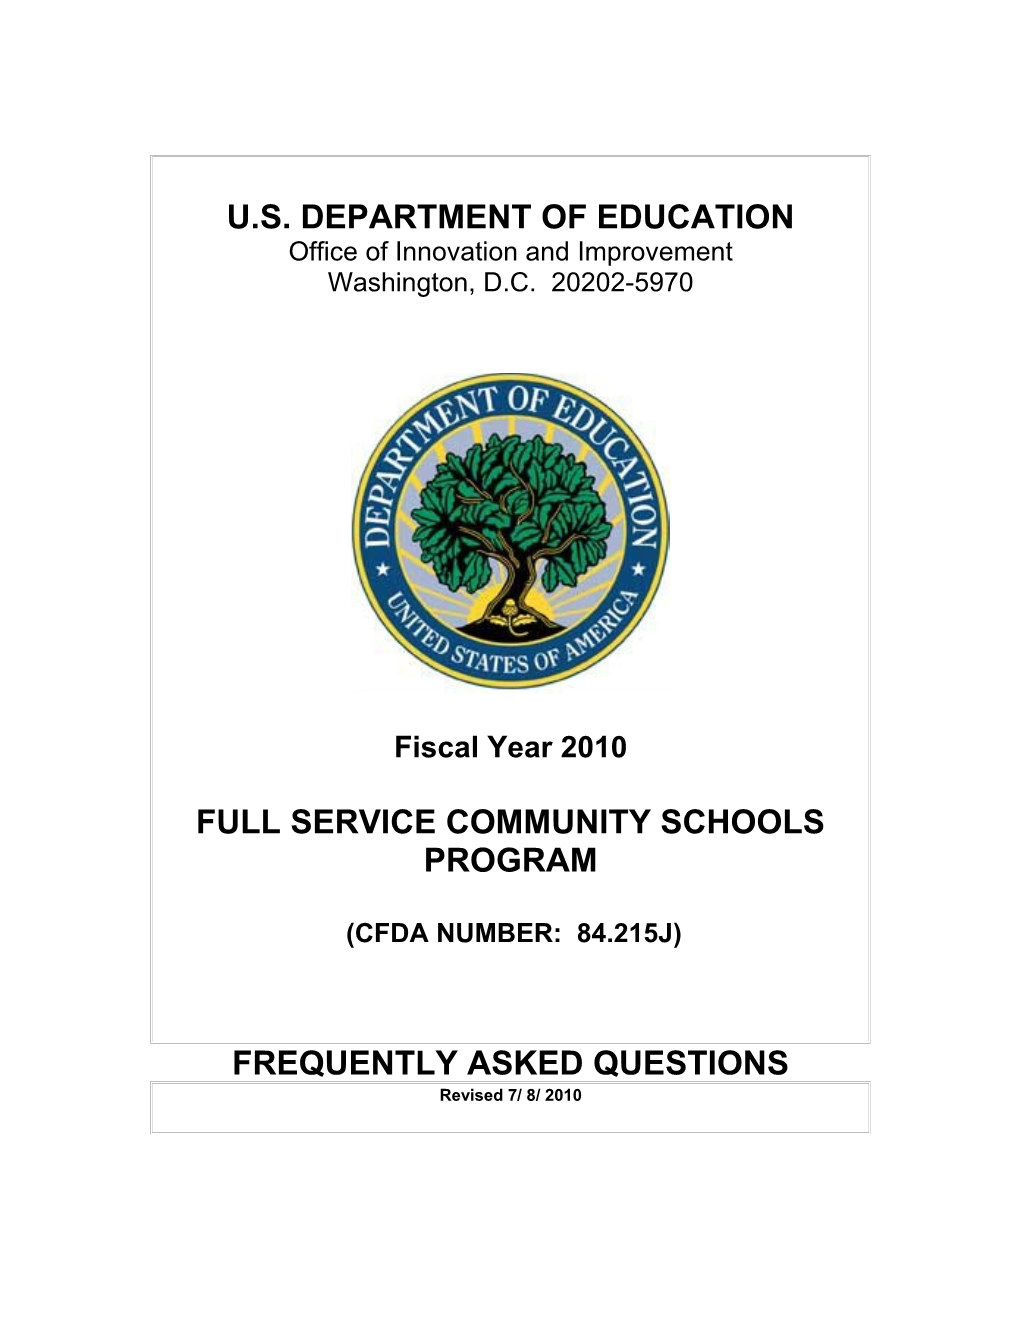 Full-Service Community Schools Program FY2010 Frequently Asked Questions (MS Word)